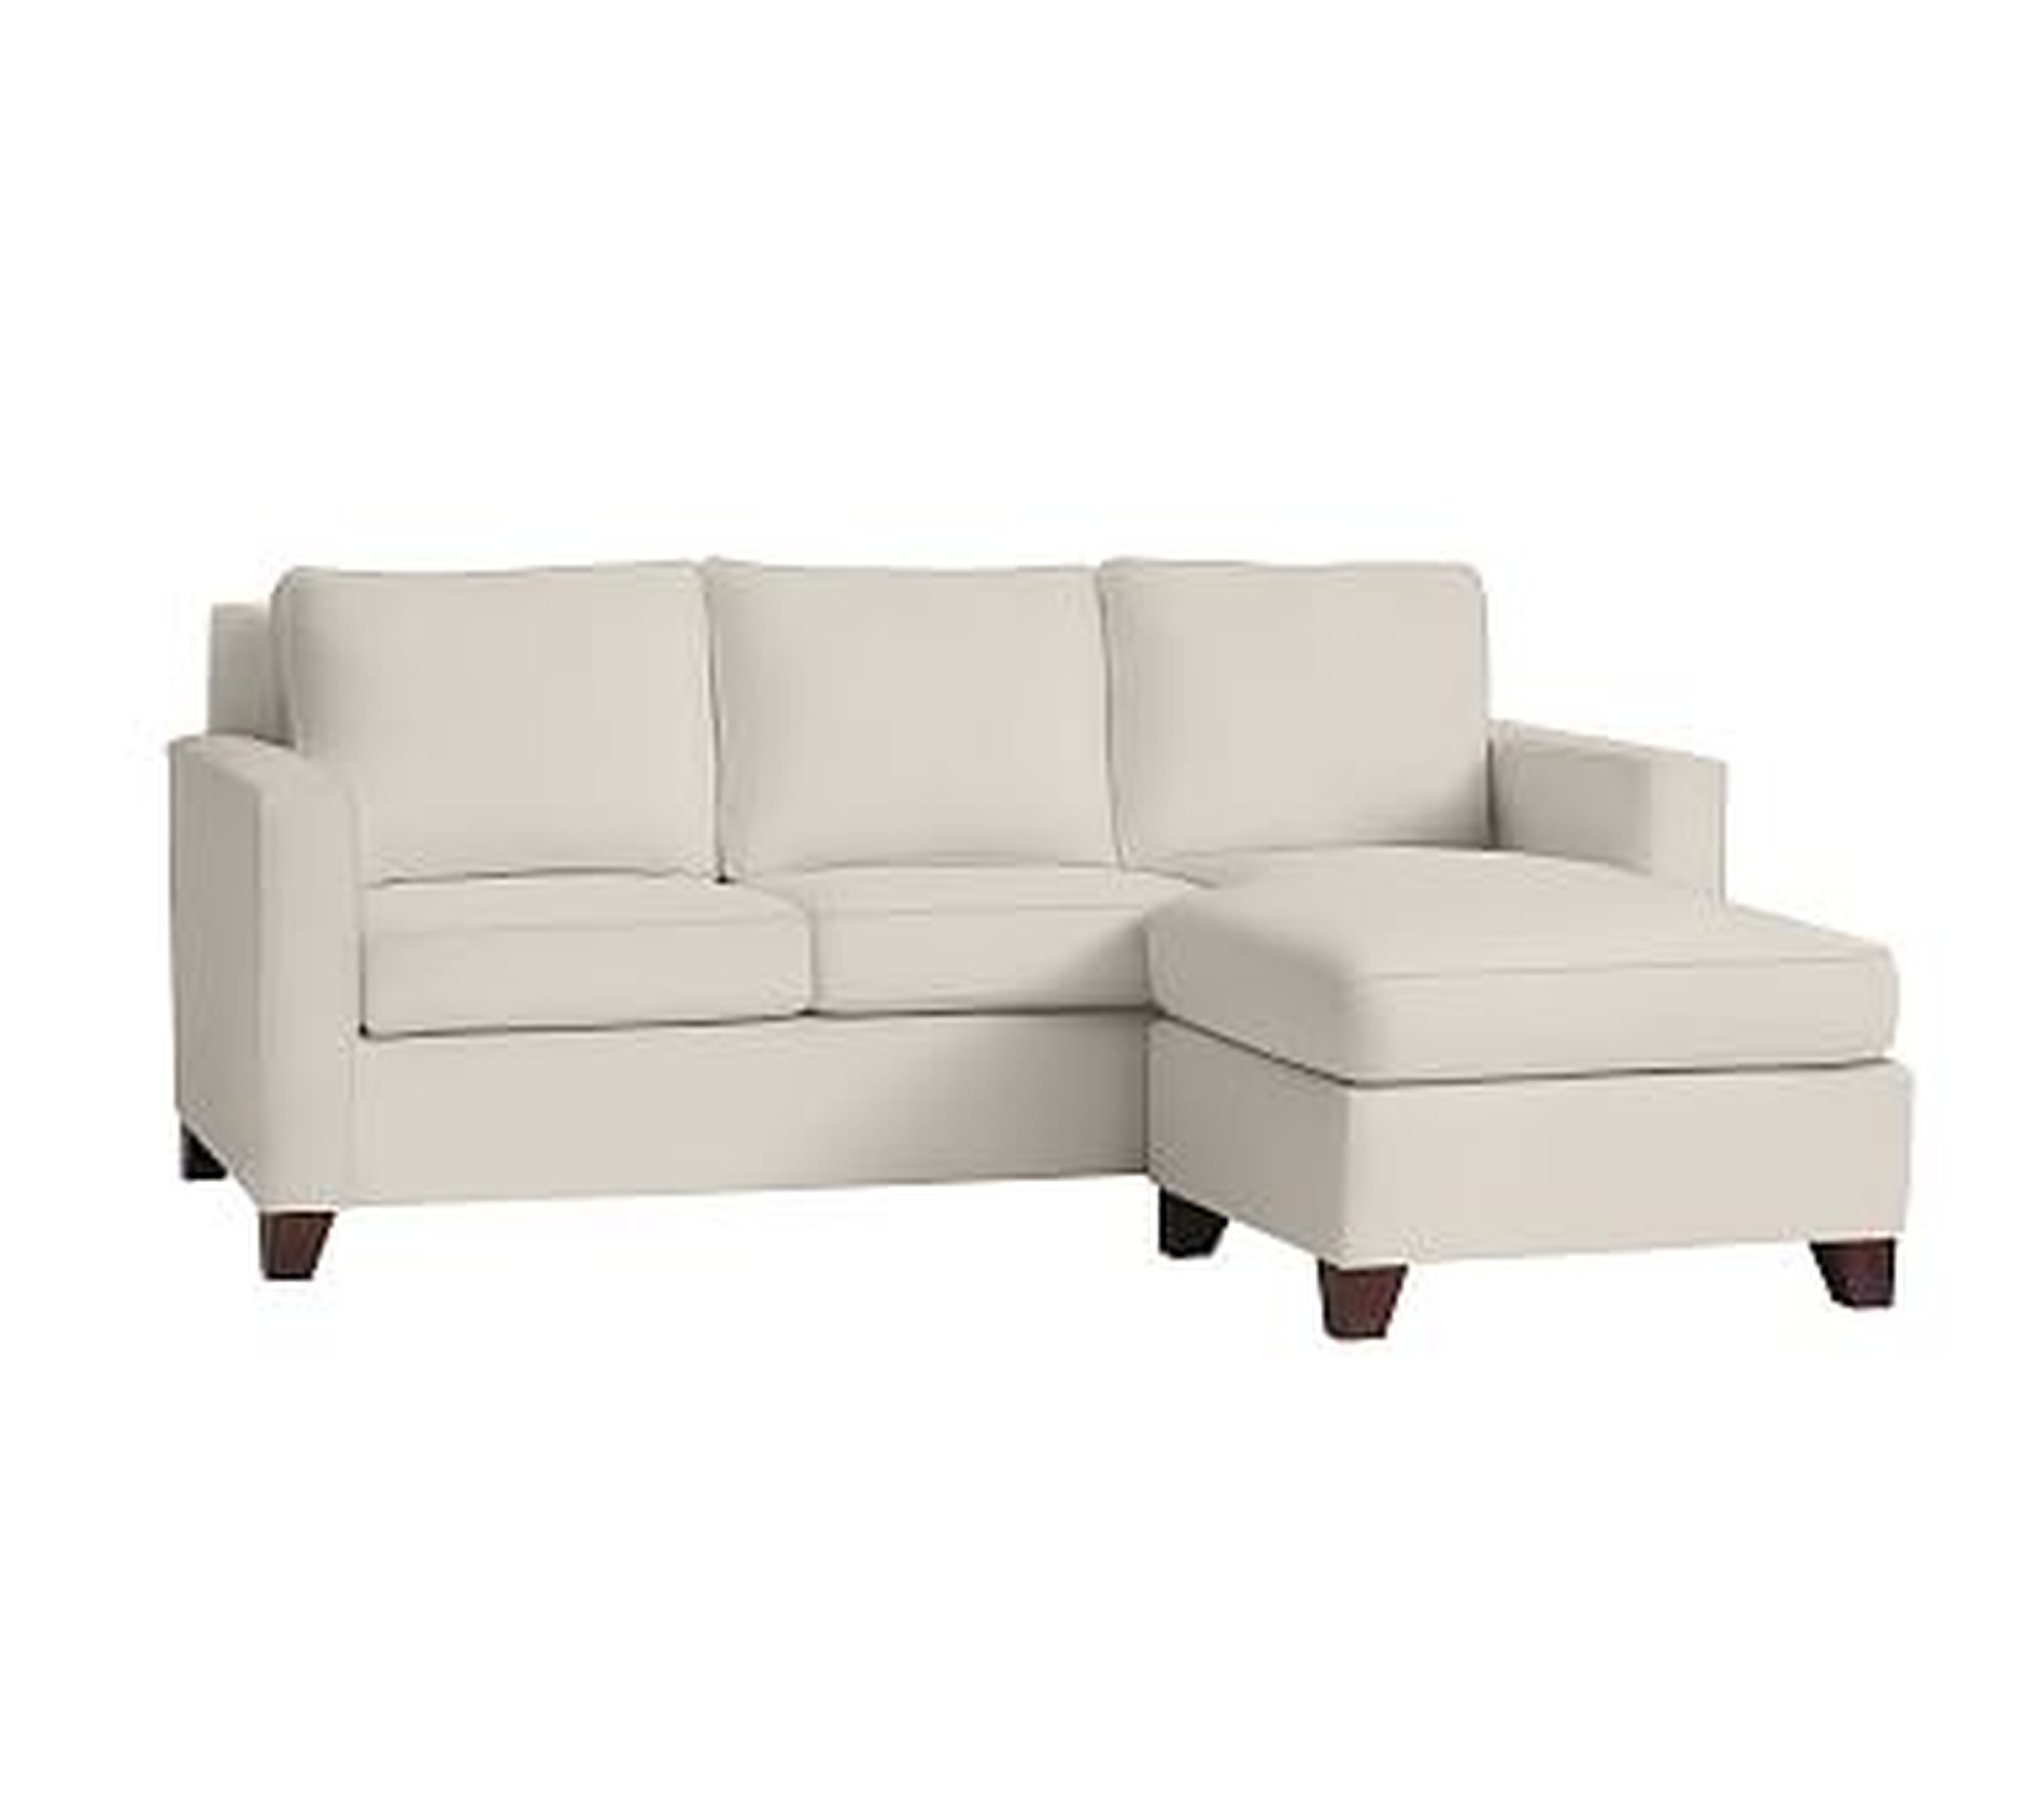 Cameron Square Arm Upholstered Sofa with Reversible Chaise Sectional, Polyester Wrapped Cushions, Twill Cream - Pottery Barn